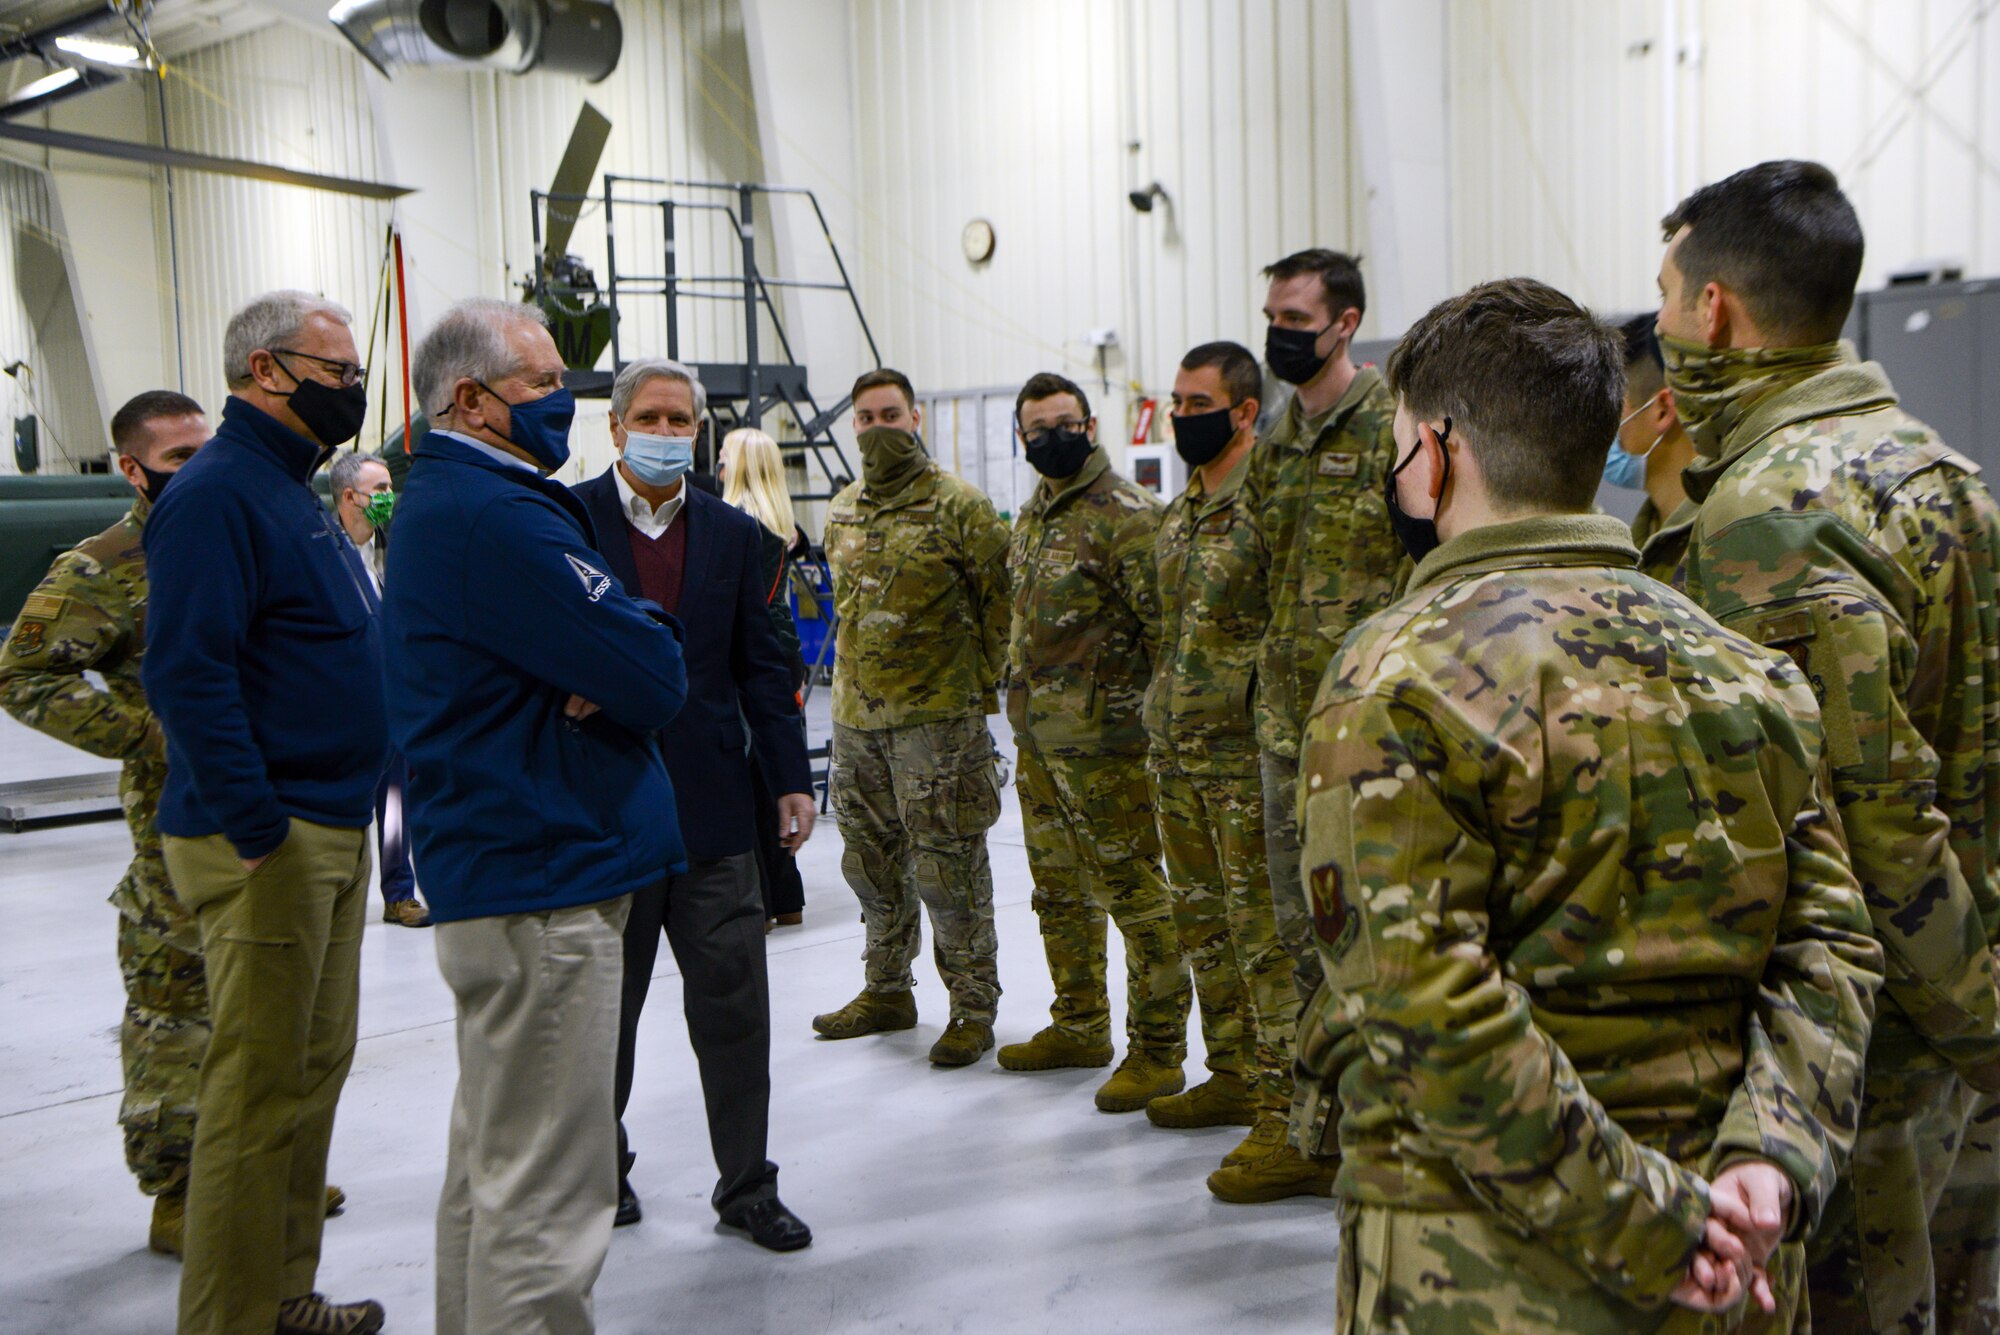 Secretary of the Air Force Frank Kendall and North Dakota senators Kevin Cramer and John Hoeven meet with the Airmen of the 54th Helicopter Squadron